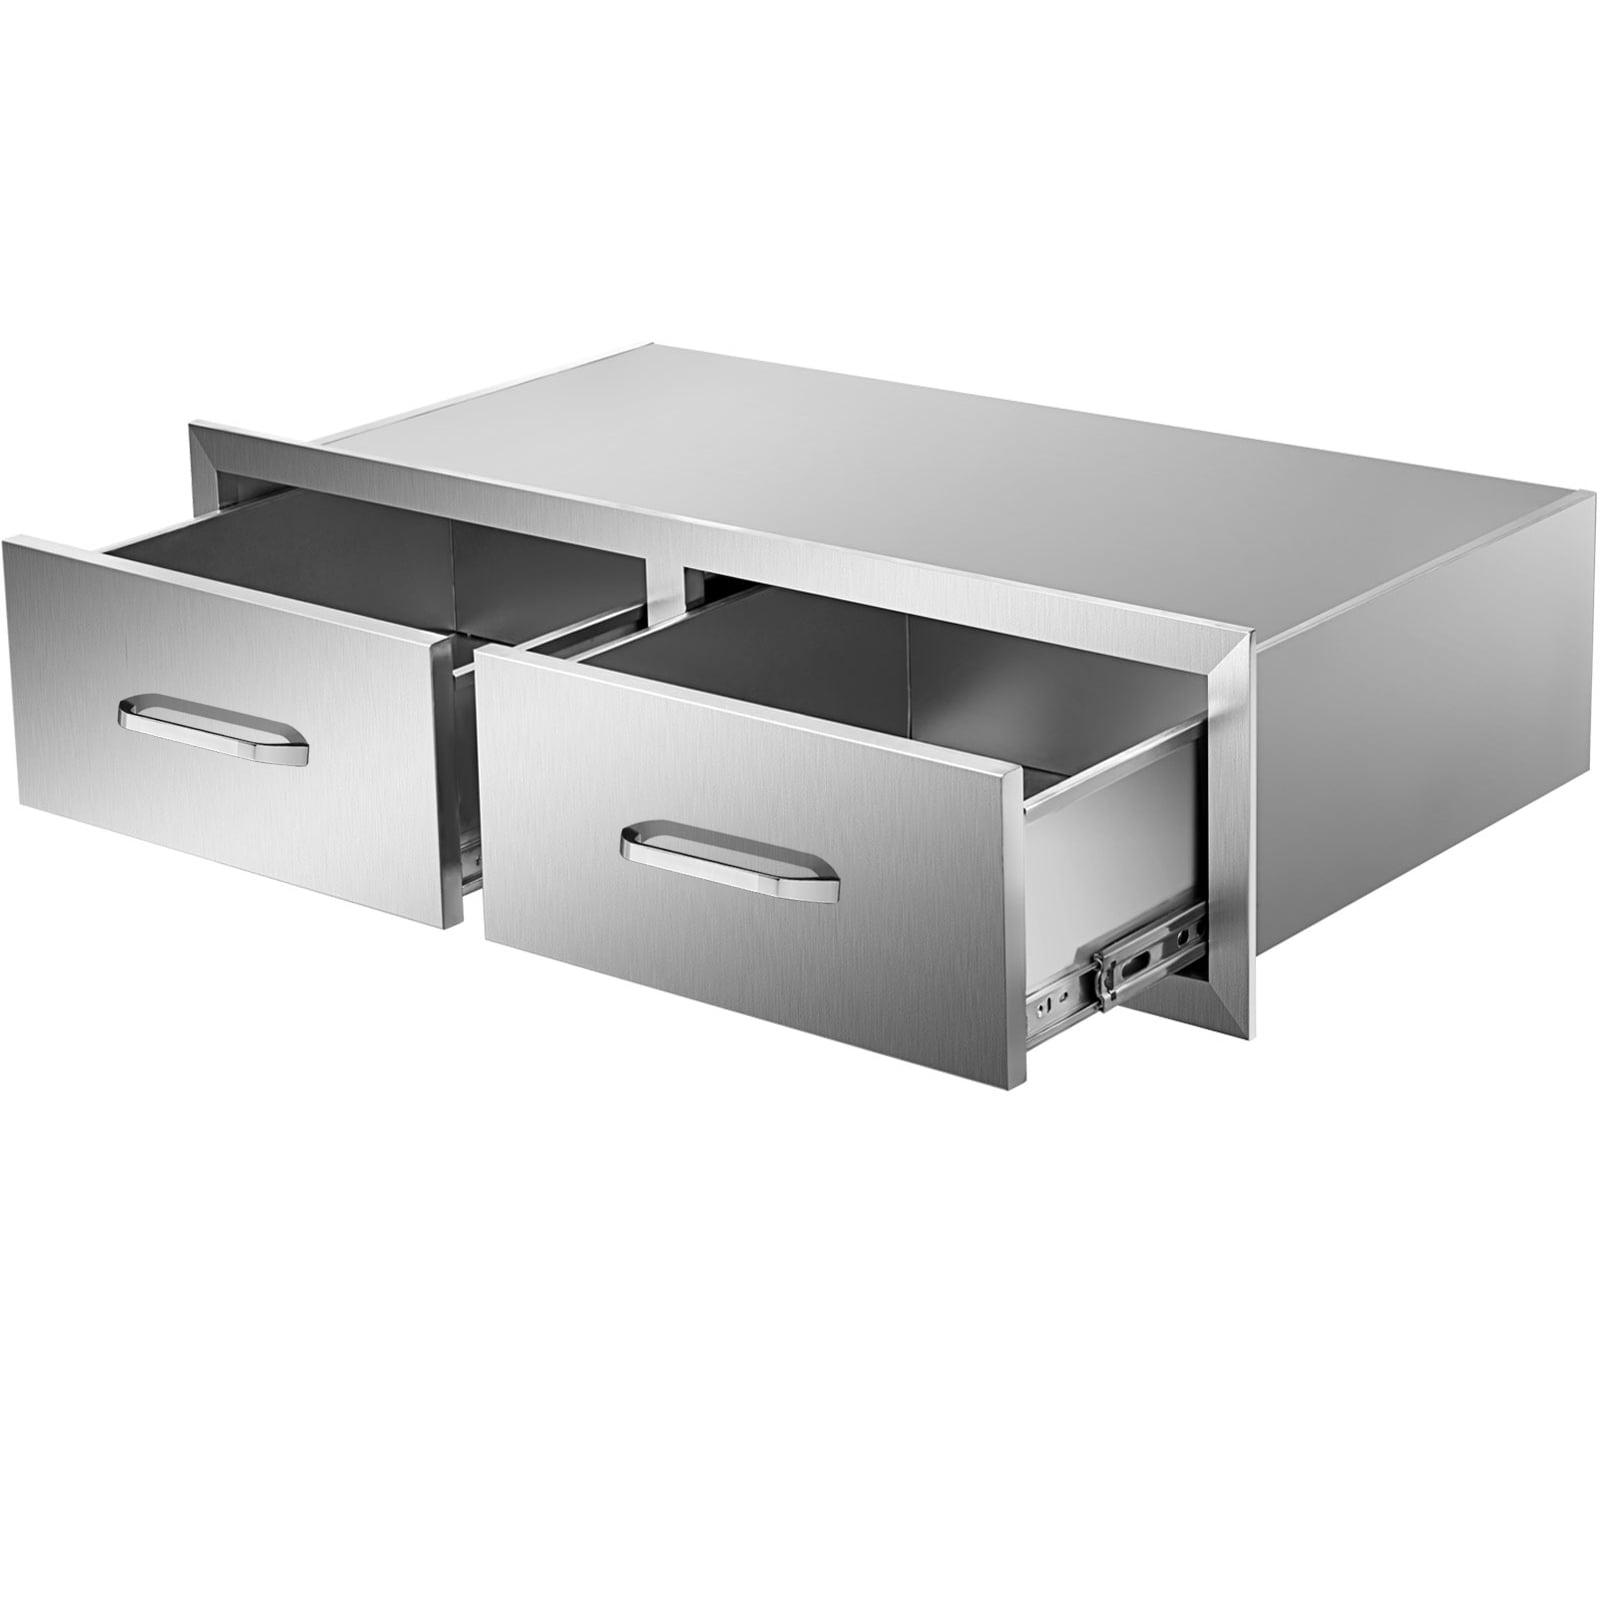 Minocool Outdoor Kitchen Drawers Stainless Steel Double Access Drawer 14 W x 15 H x 23 D with Chrome Handle Flush Mount Storage Drawers for Outdoor Kitchen BBQ Island Drawers 